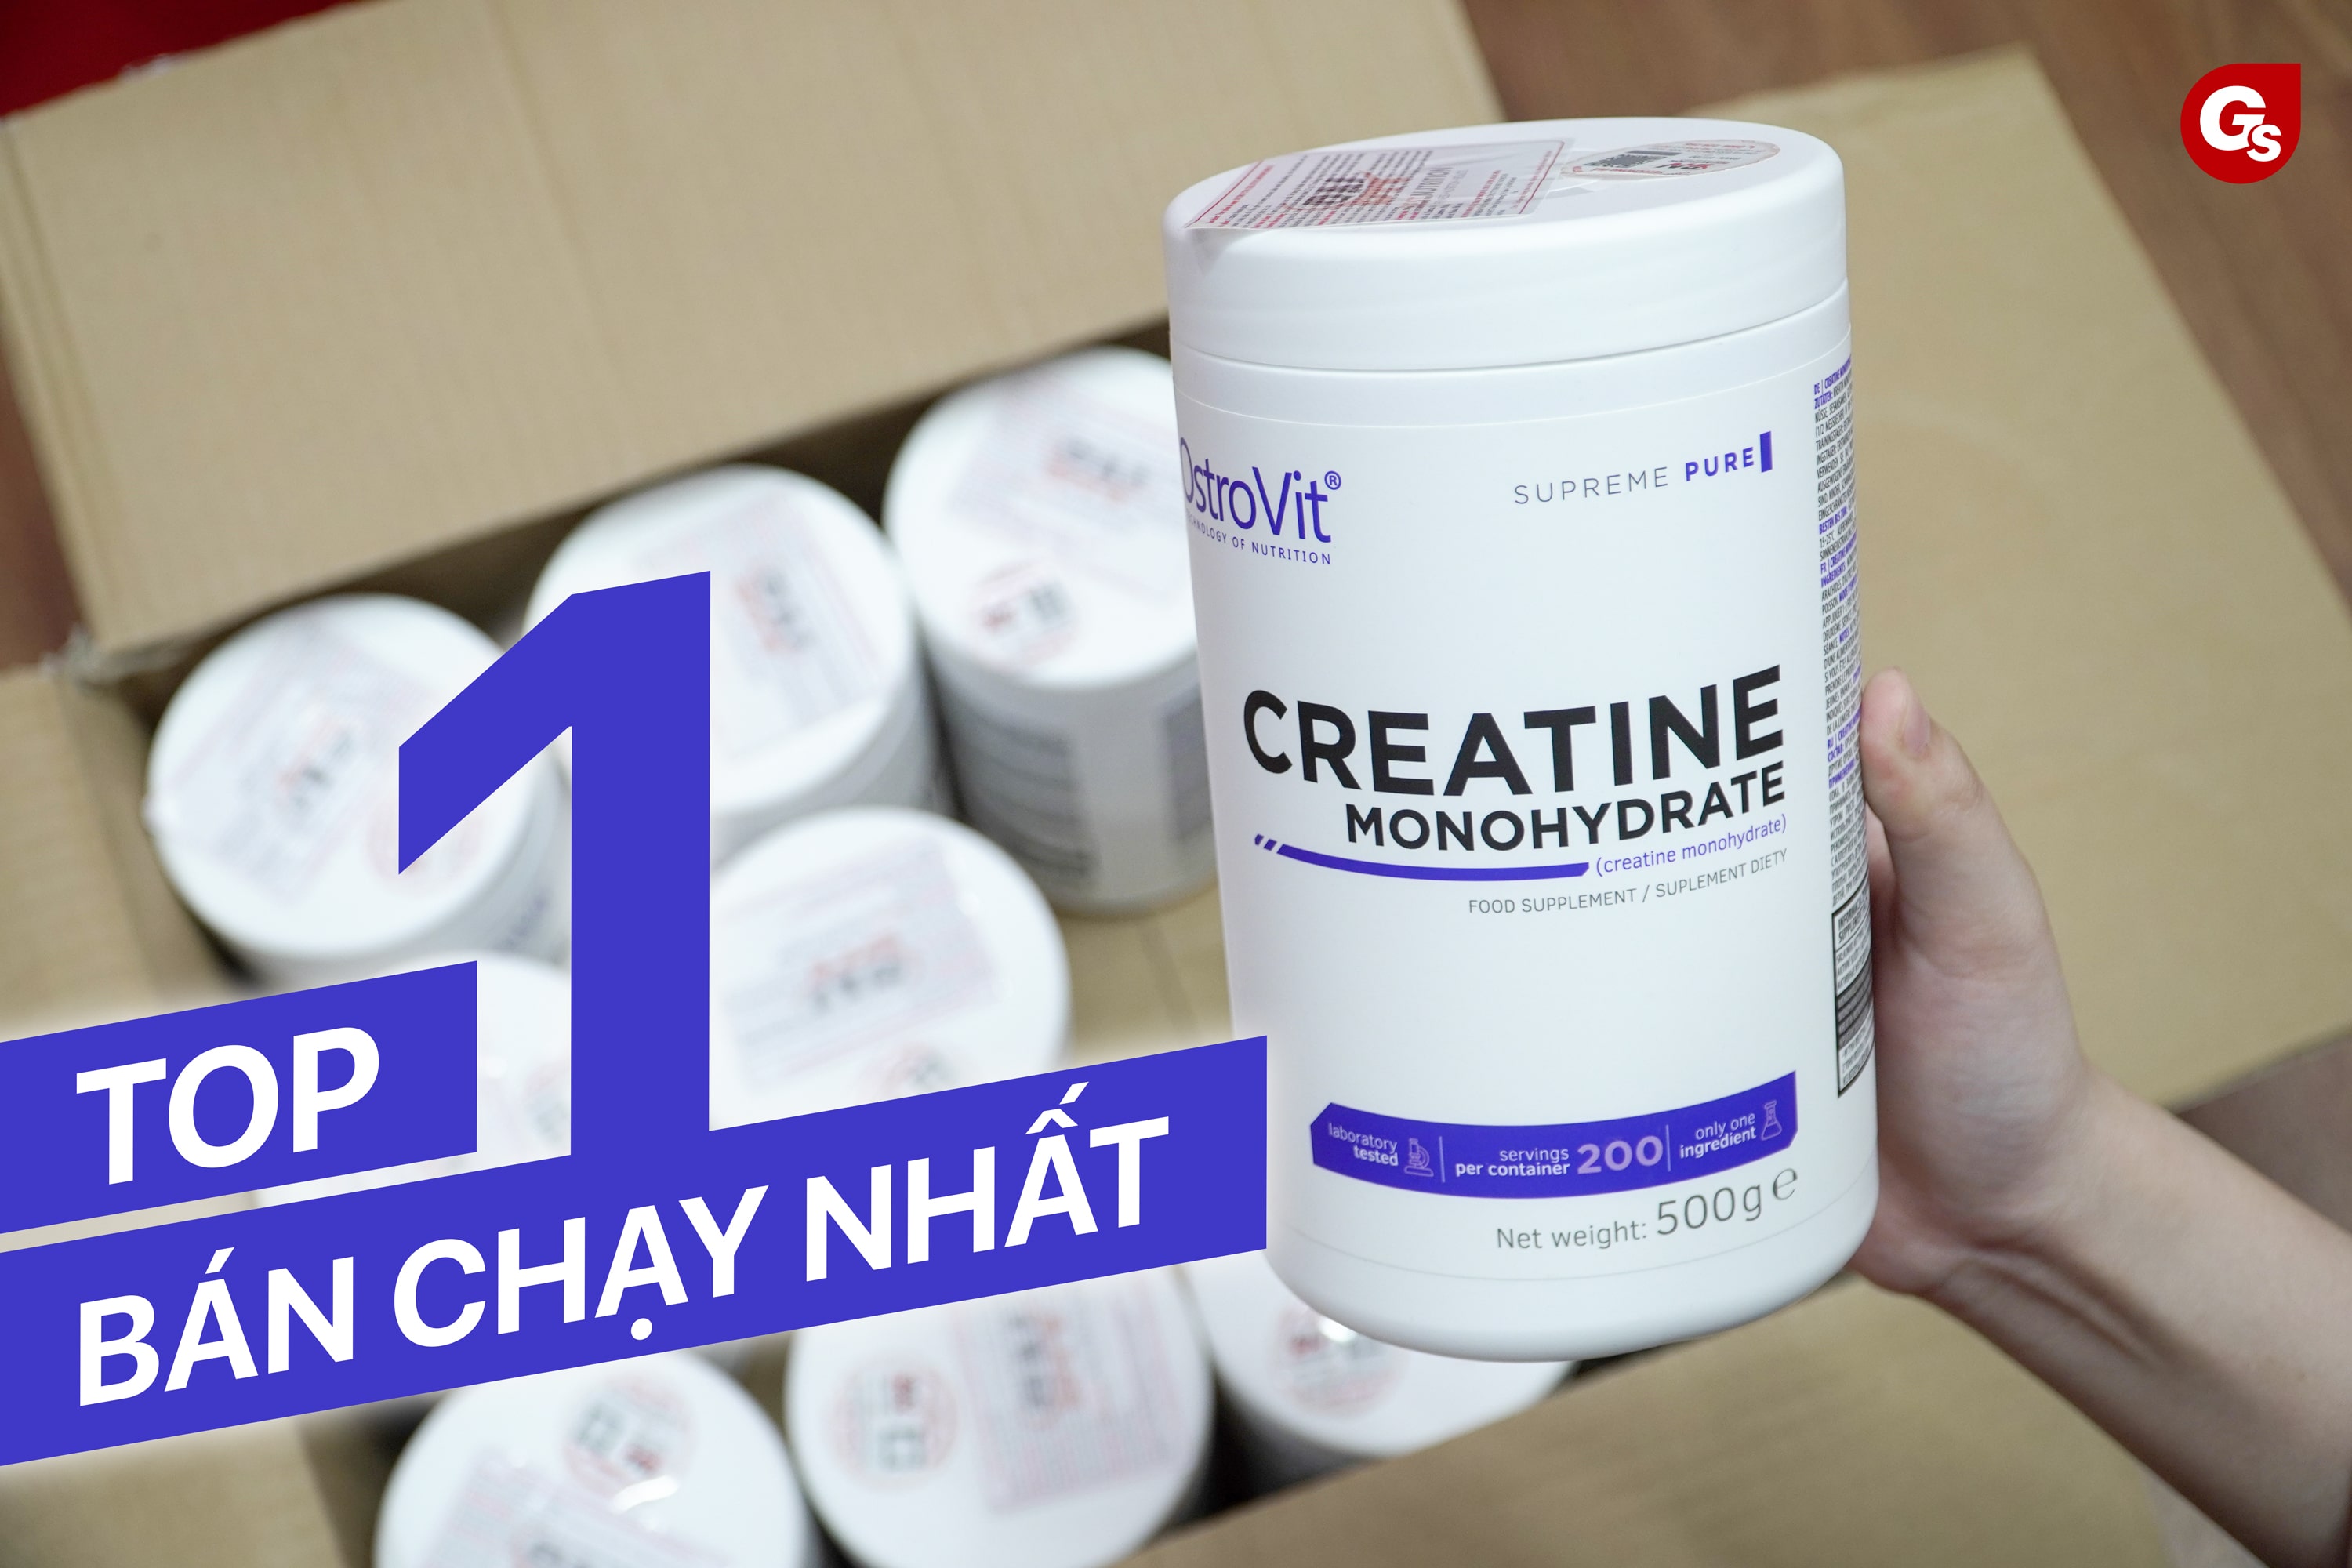 danh-gia-review-ostrovit-creatine-gymstore-2